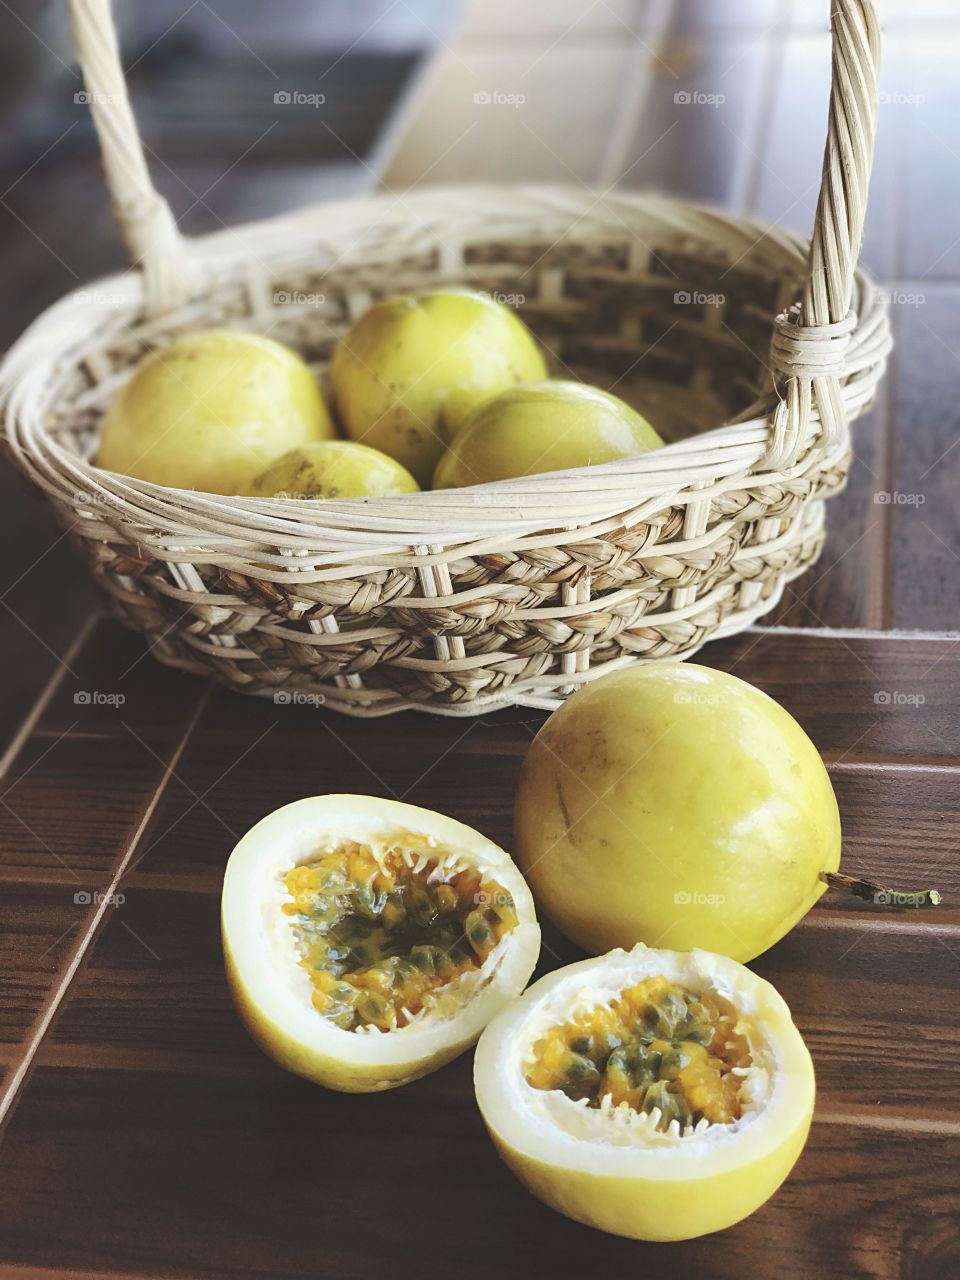 Half-cut passion fruits (Passiflora edulis) in and out of basket